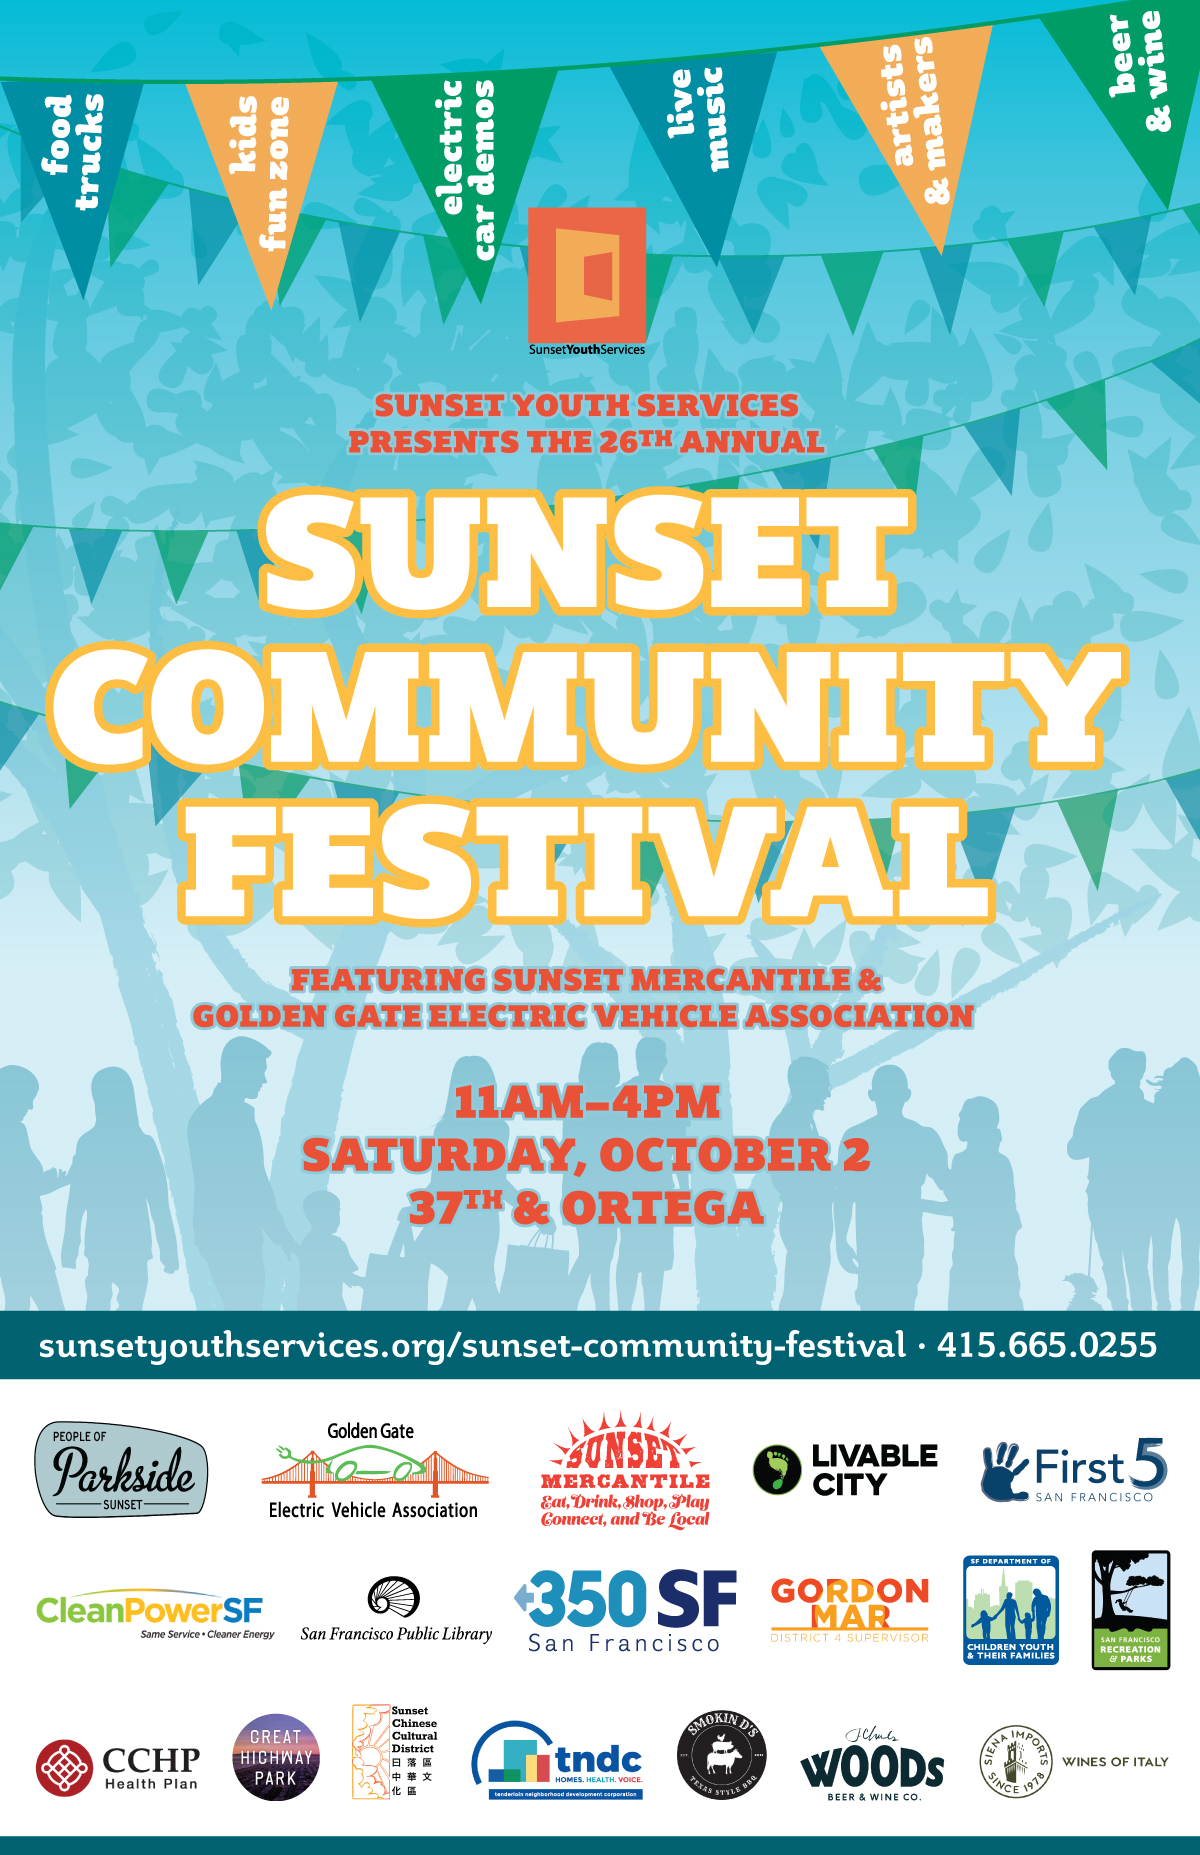 SUNSET YOUTH SERVICES PRESENTS THE 26TH ANNUAL SUNSET COMMUNITY FESTIVAL FEATURING SUNSET MERCANTILE & GOLDEN GATE ELECTRIC VEHICLE ASSOCIATION 11AM–4PM SATURDAY, OCTOBER 2 37TH & ORTEGA